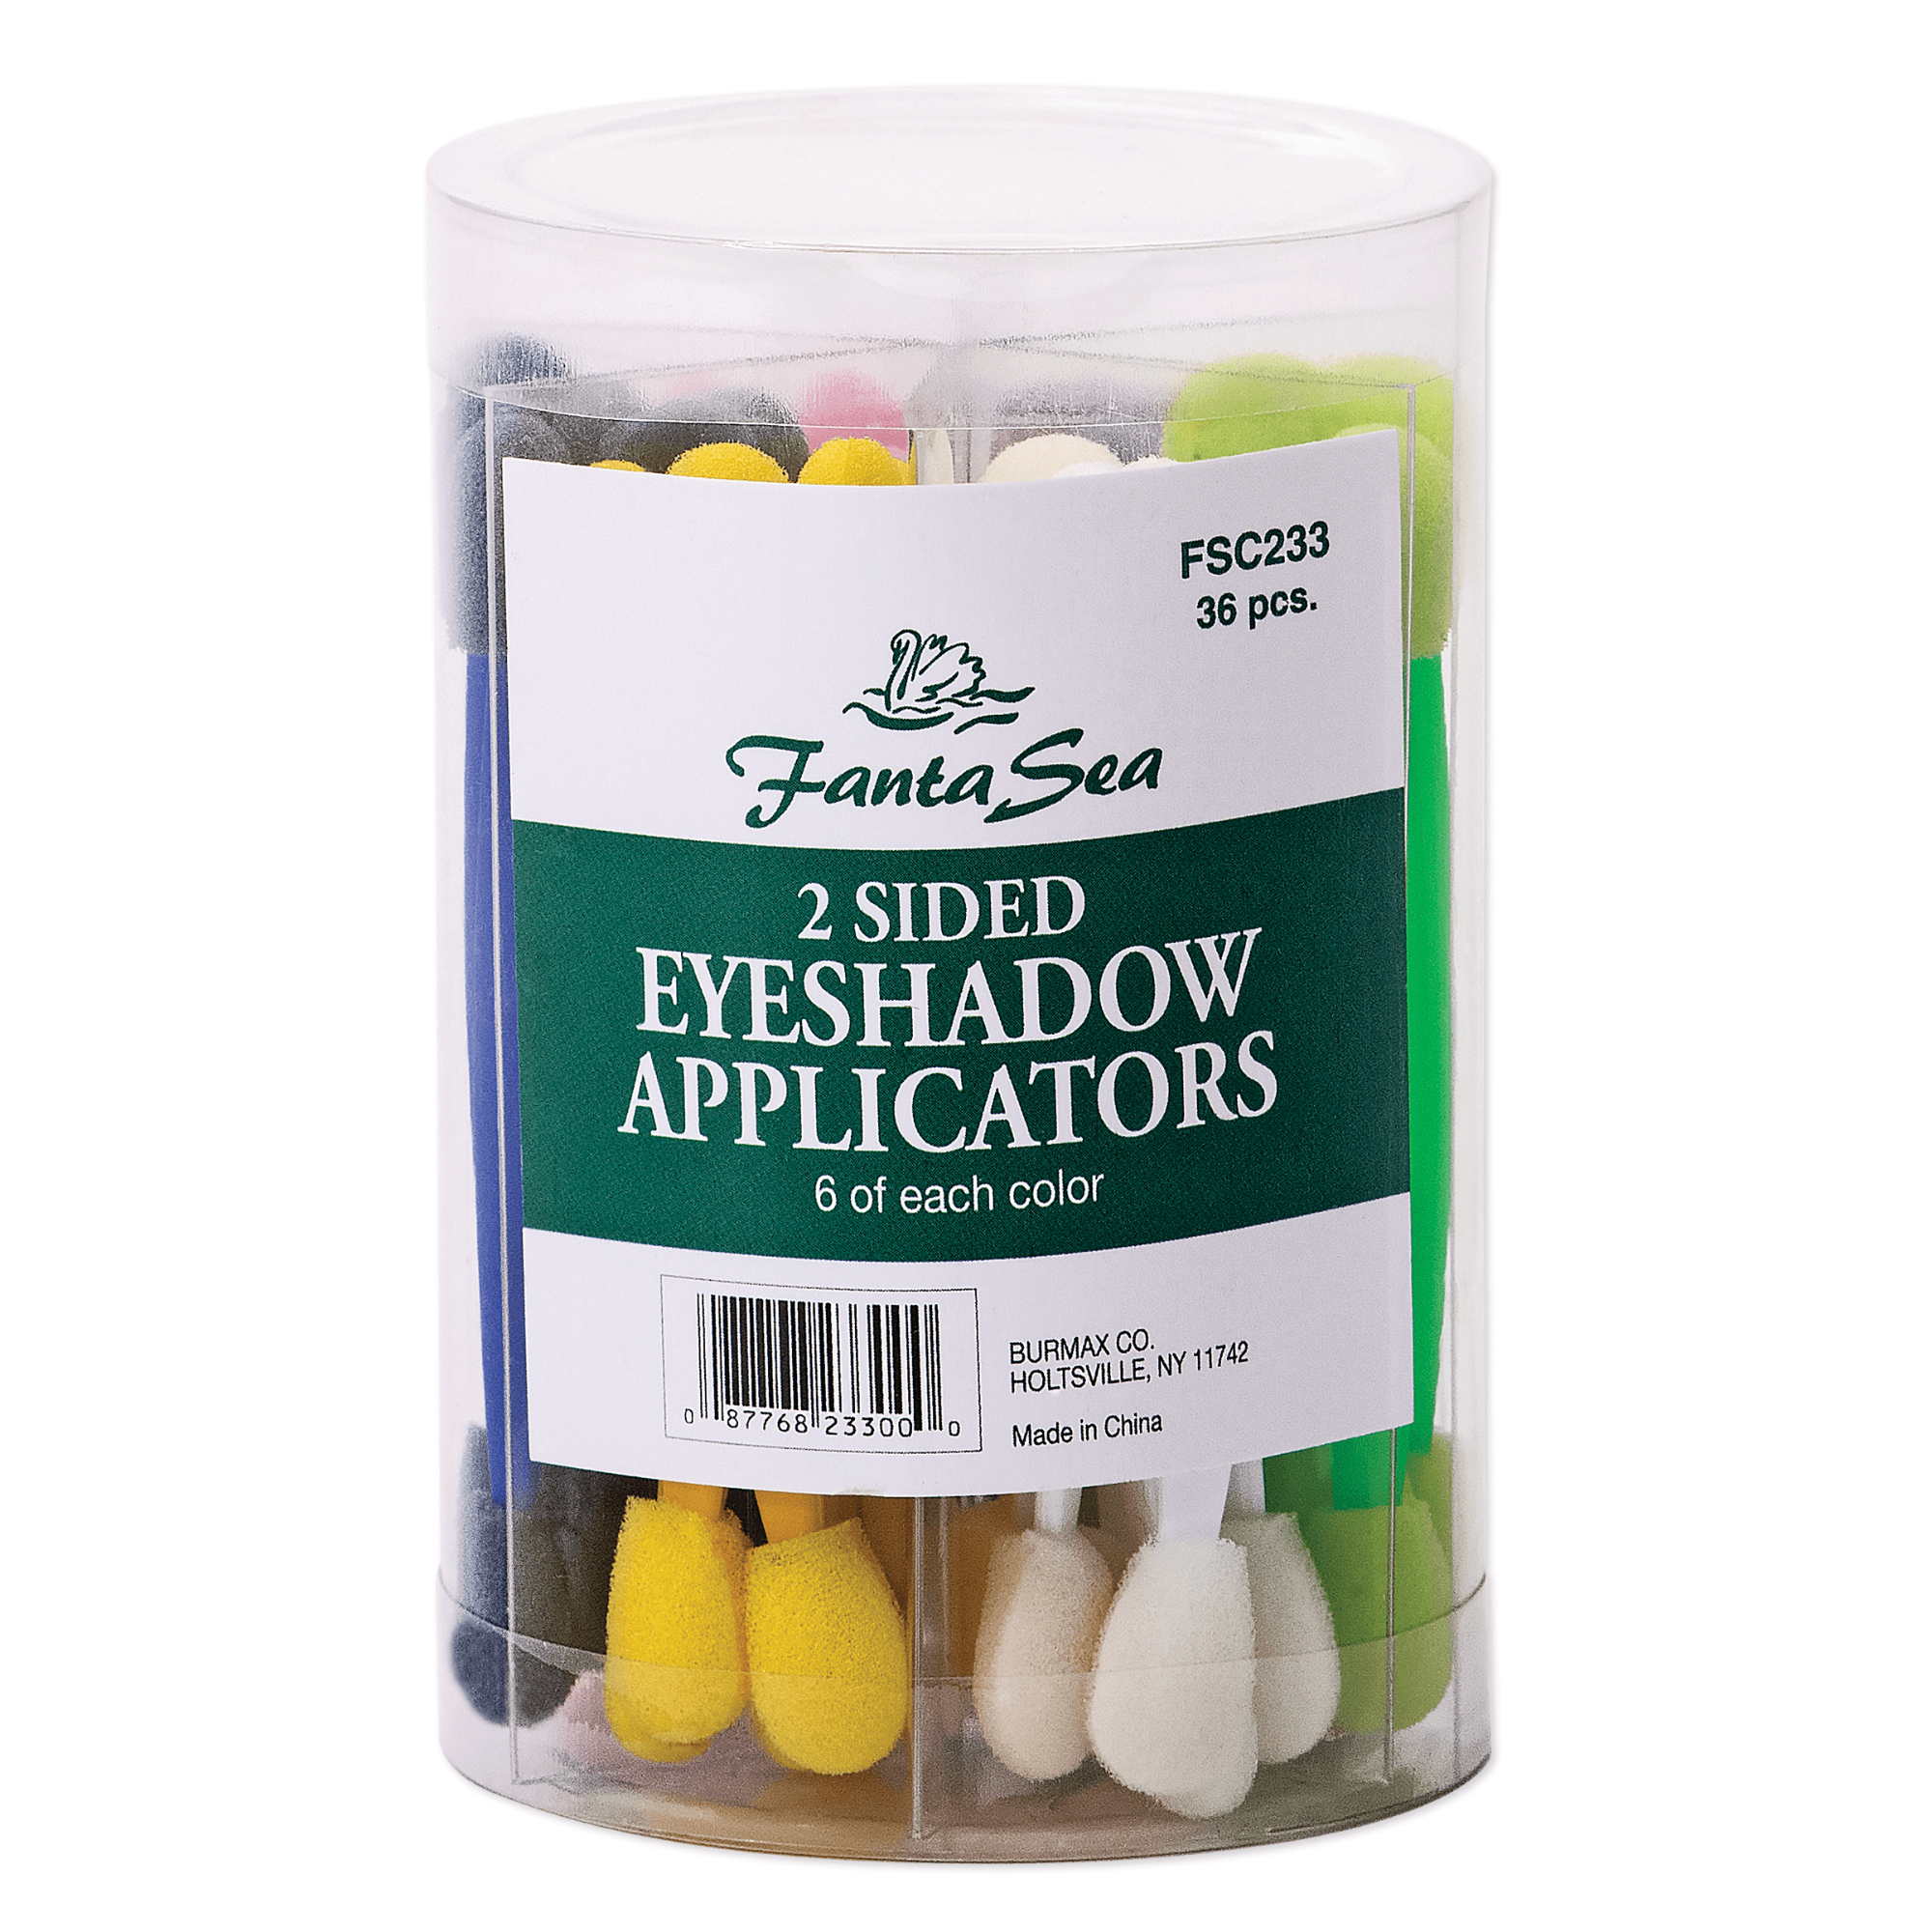 Eyeshadow Applicators - 36 in a container